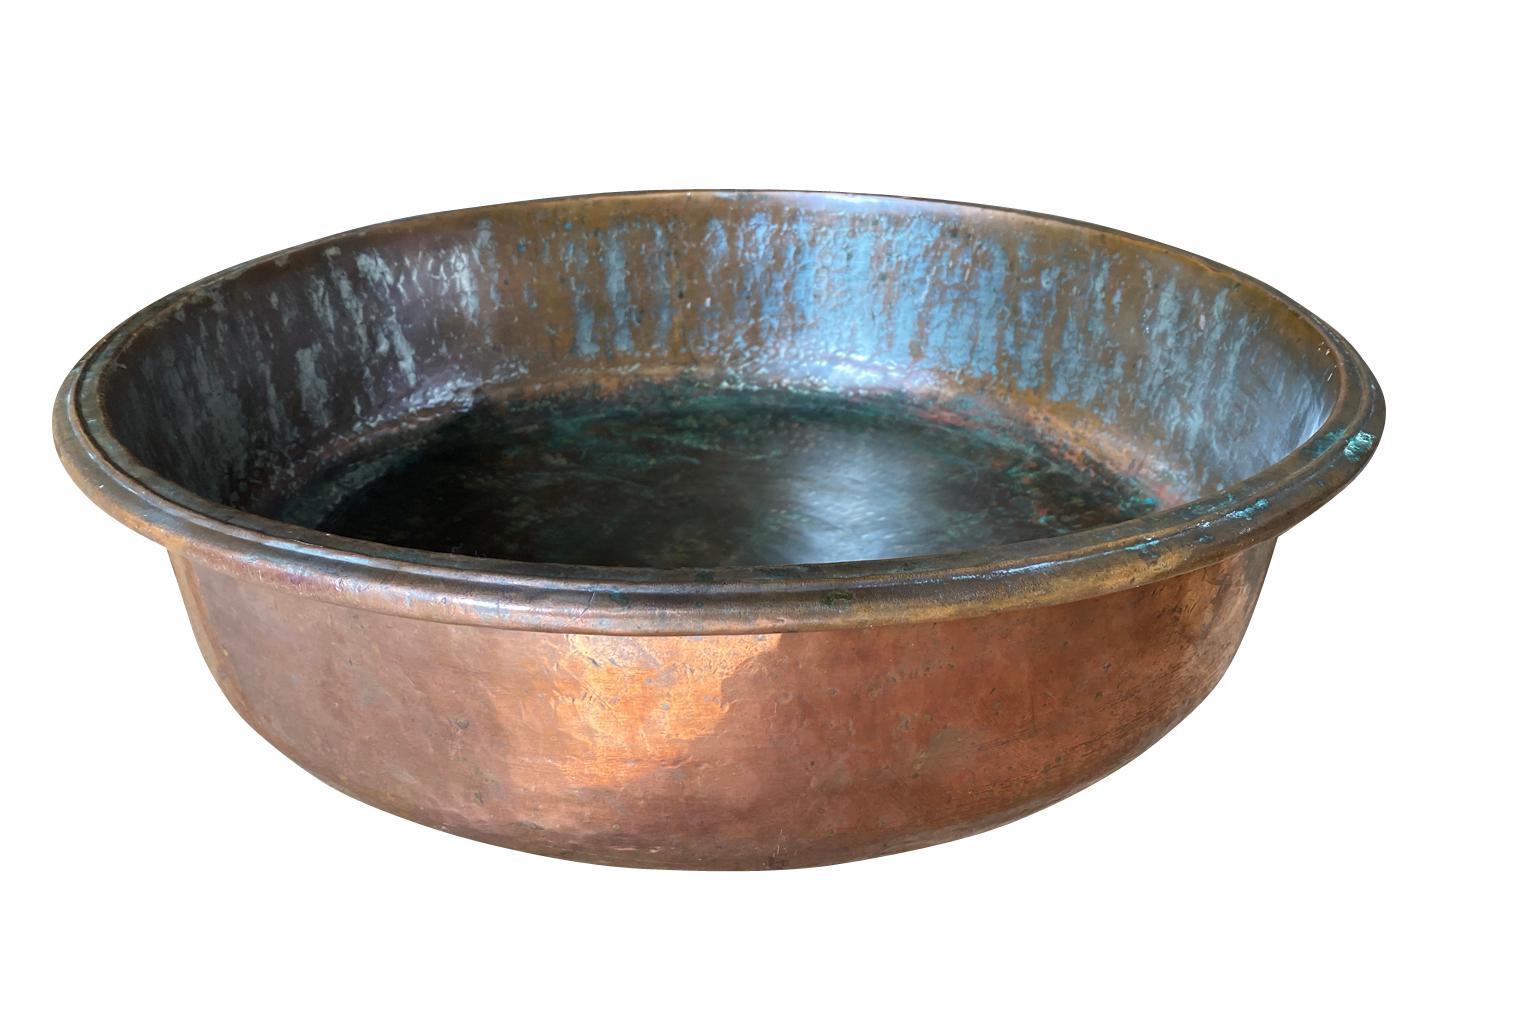 A terrific and large scale Italian mid-19th century Copper Pan.  A fabulous decorative piece for any kitchen island or farm table.